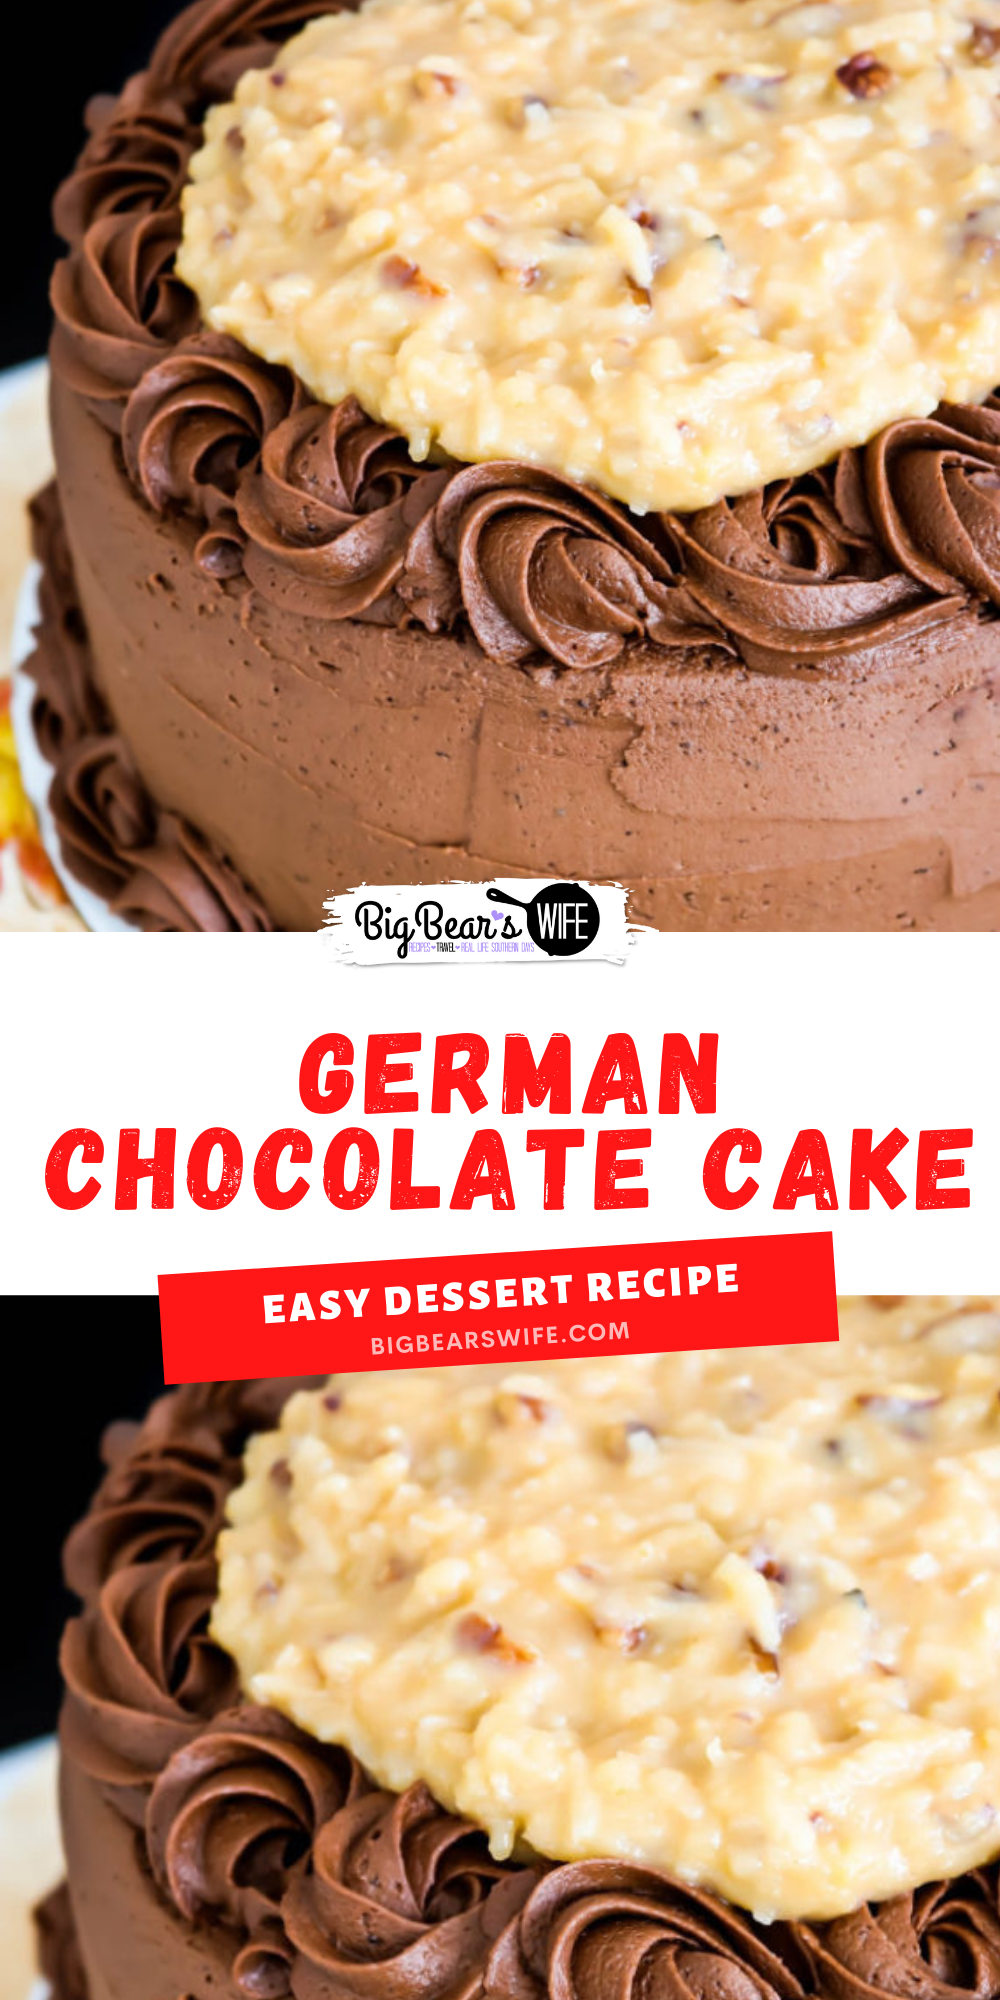 This German Chocolate Cake has three layers of amazing homemade chocolate cake, frosted with a homemade chocolate frosting and topped with a delicious pecan coconut filling!

 via @bigbearswife